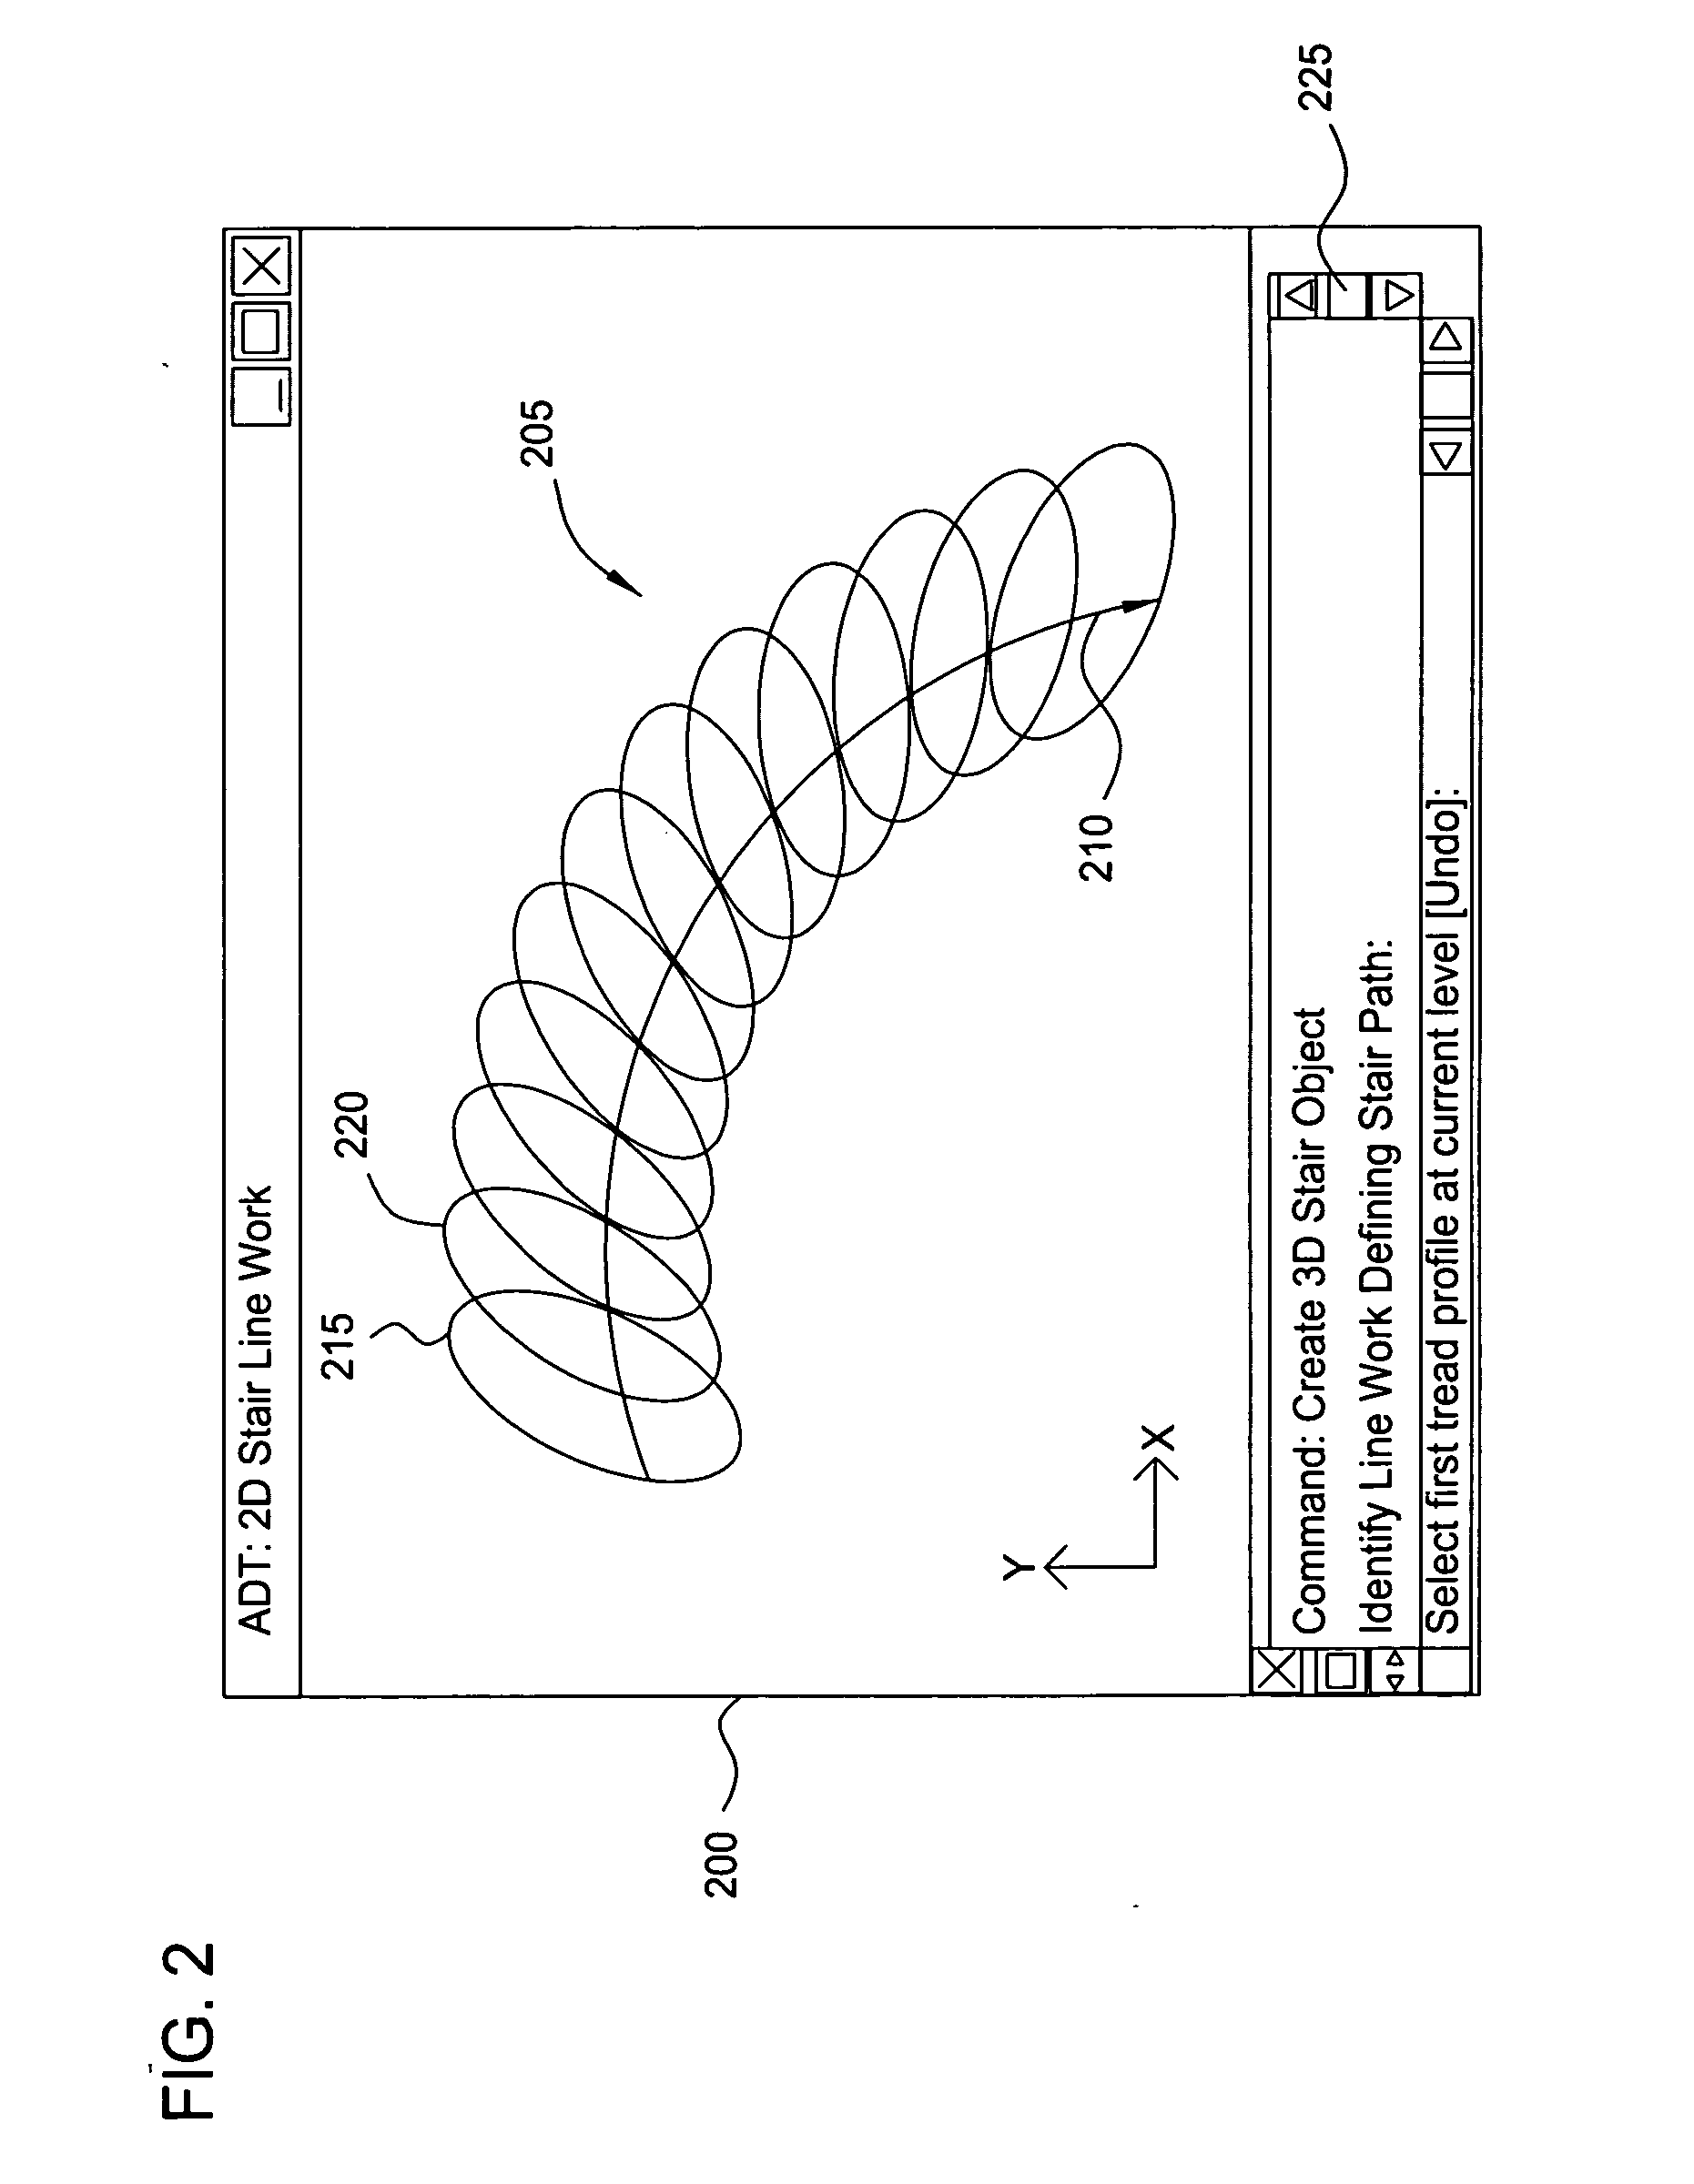 Method for generating three dimensional stair objects in computer aided design drawings